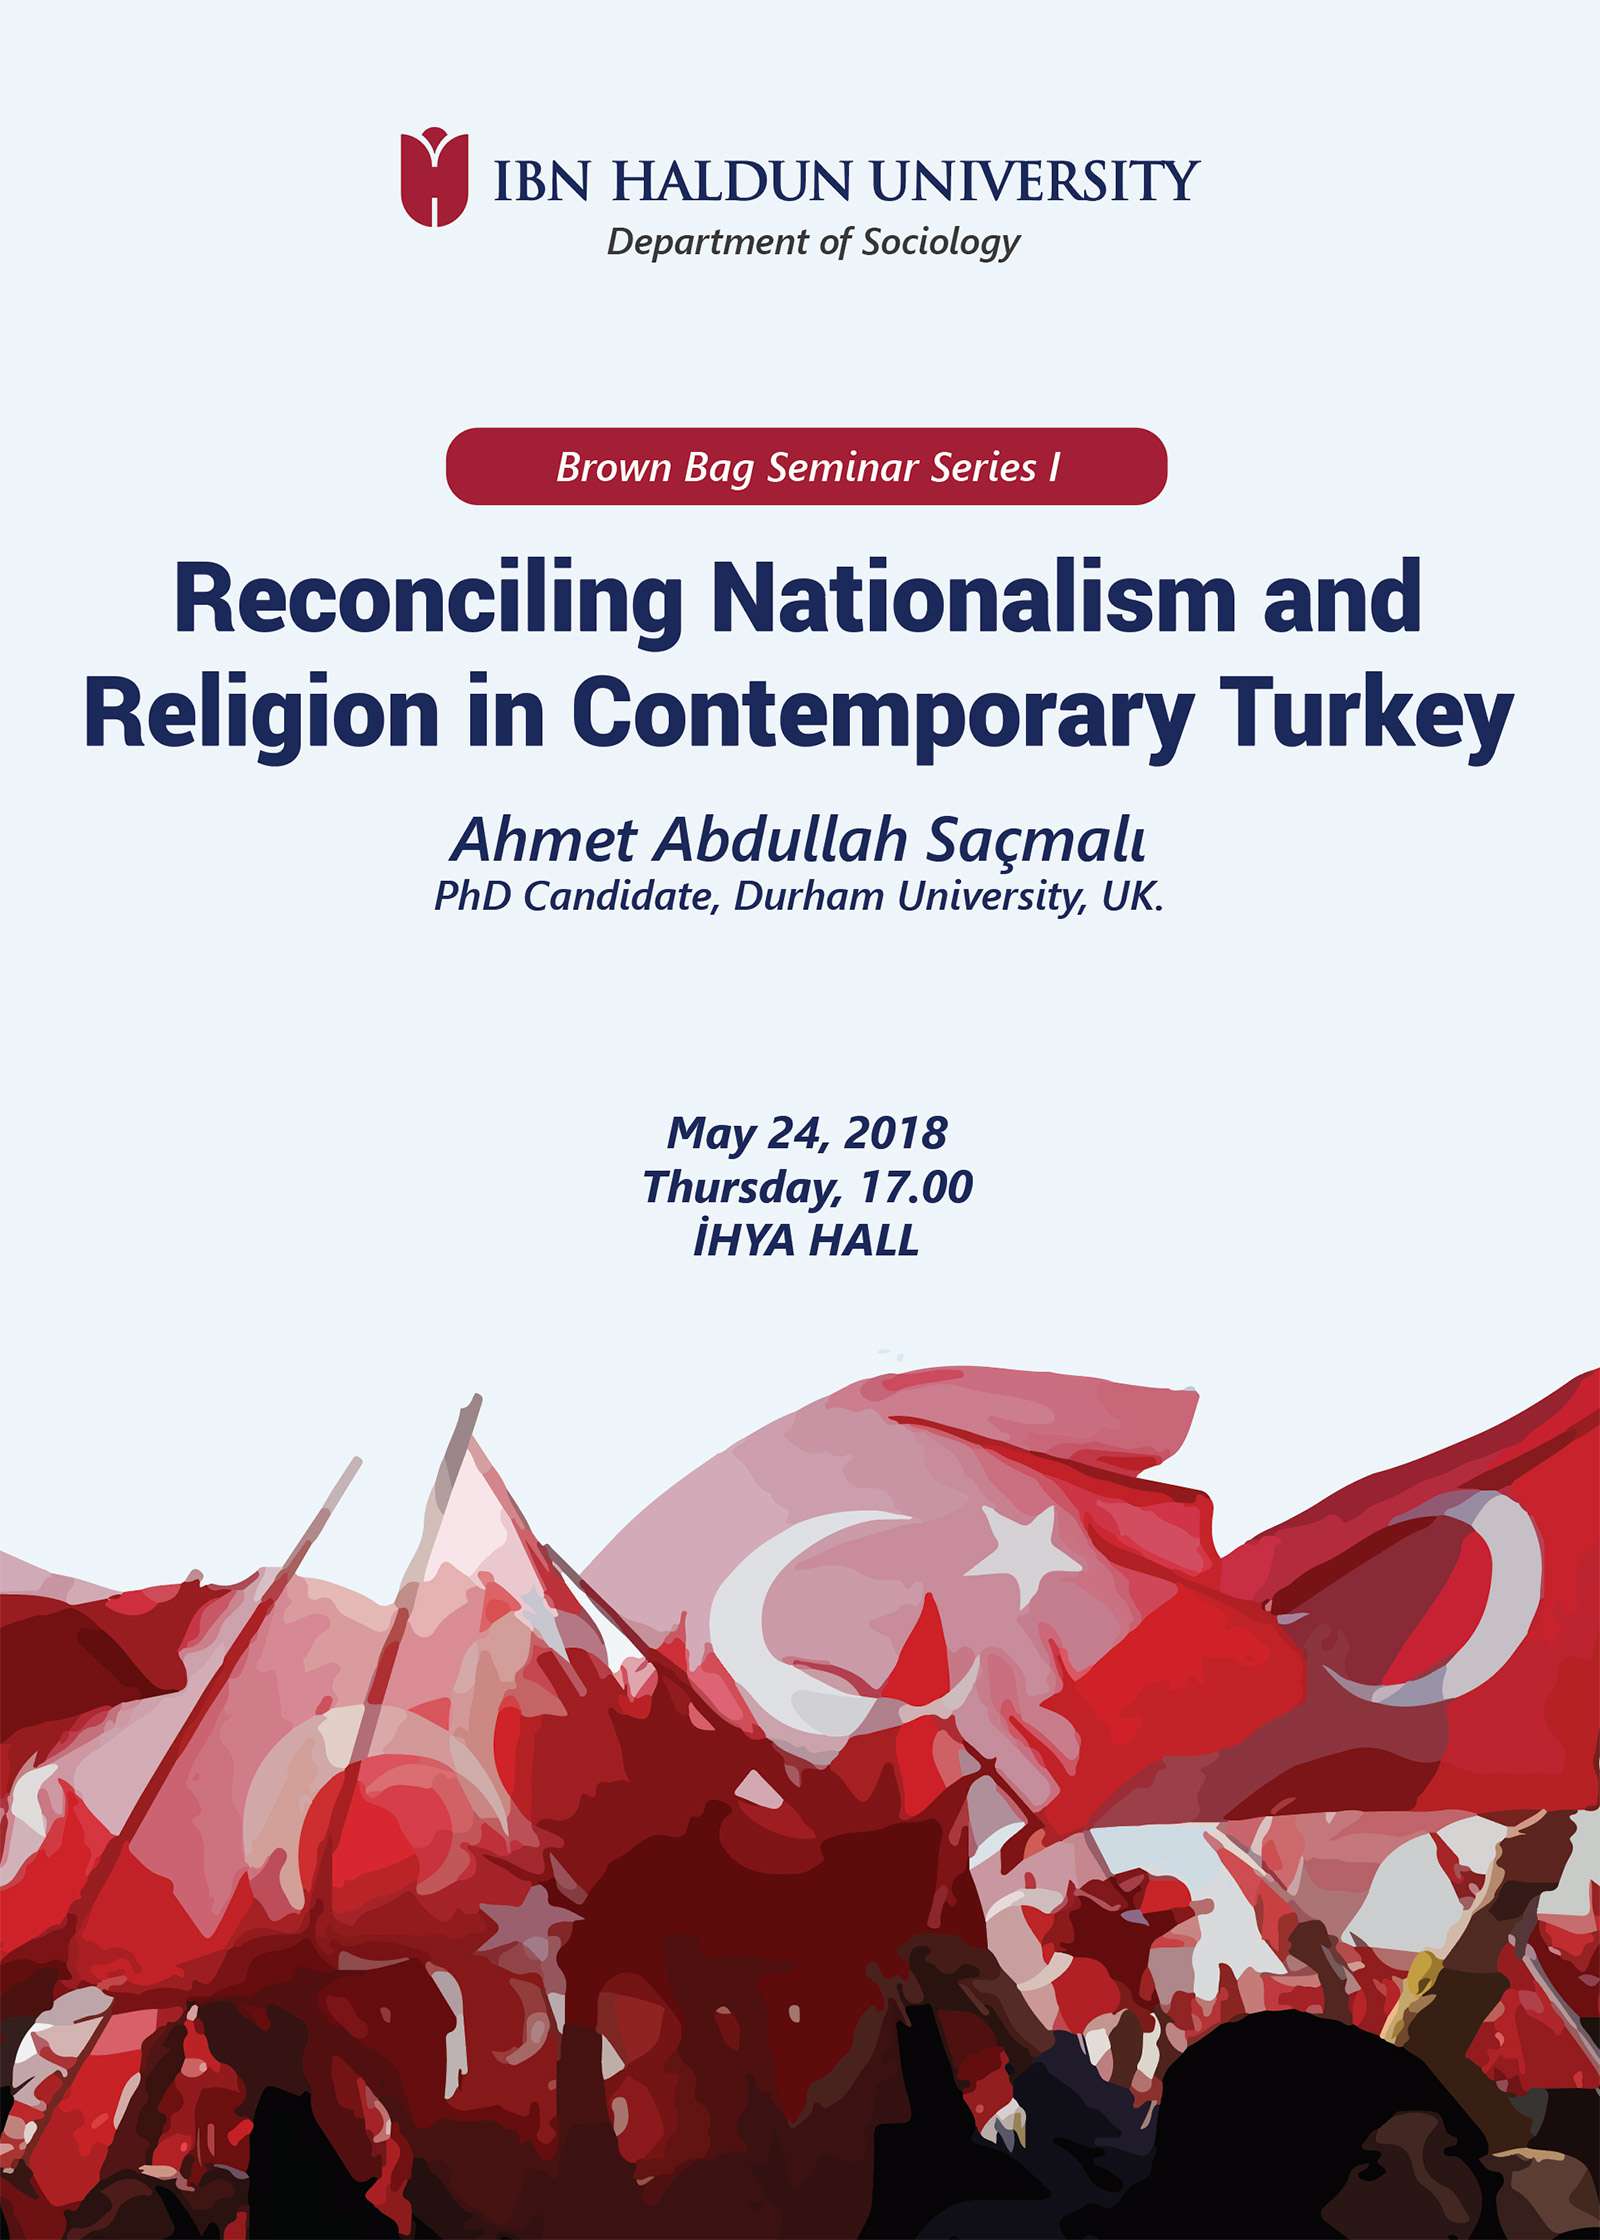 Reconciling Nationalism and Religion in Contemporary Turkey